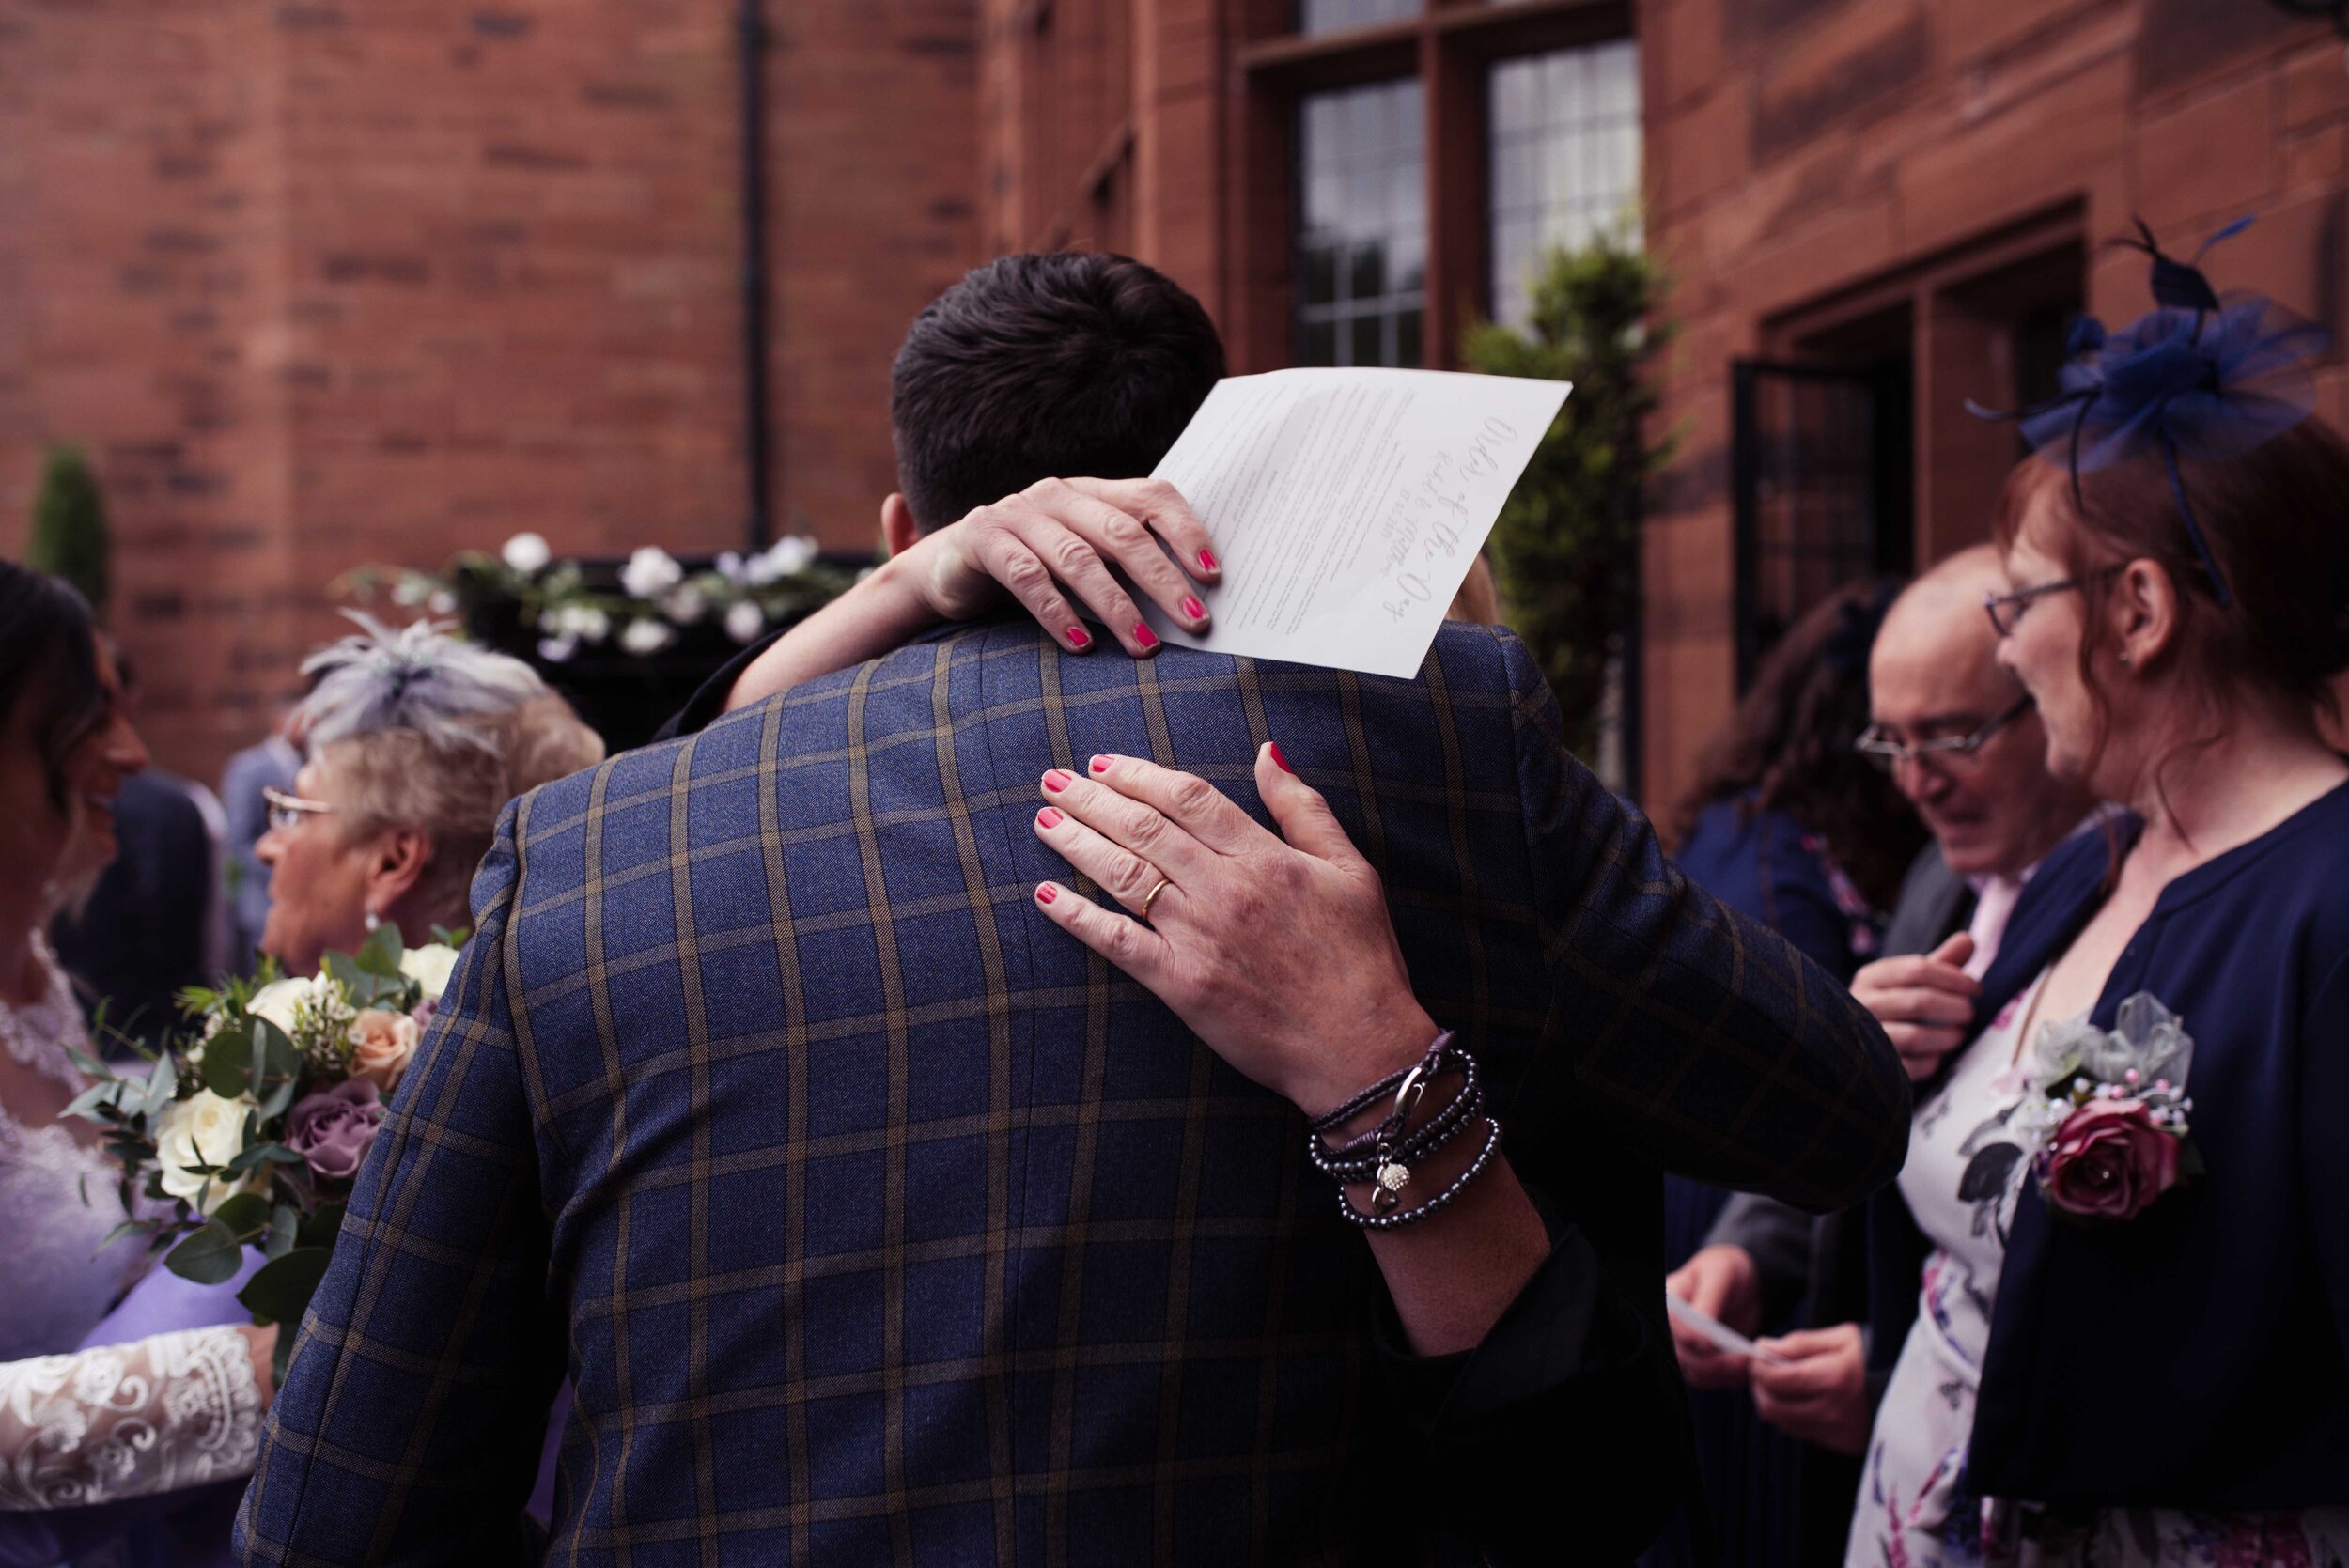 Big cuddles for the groom after the wedding